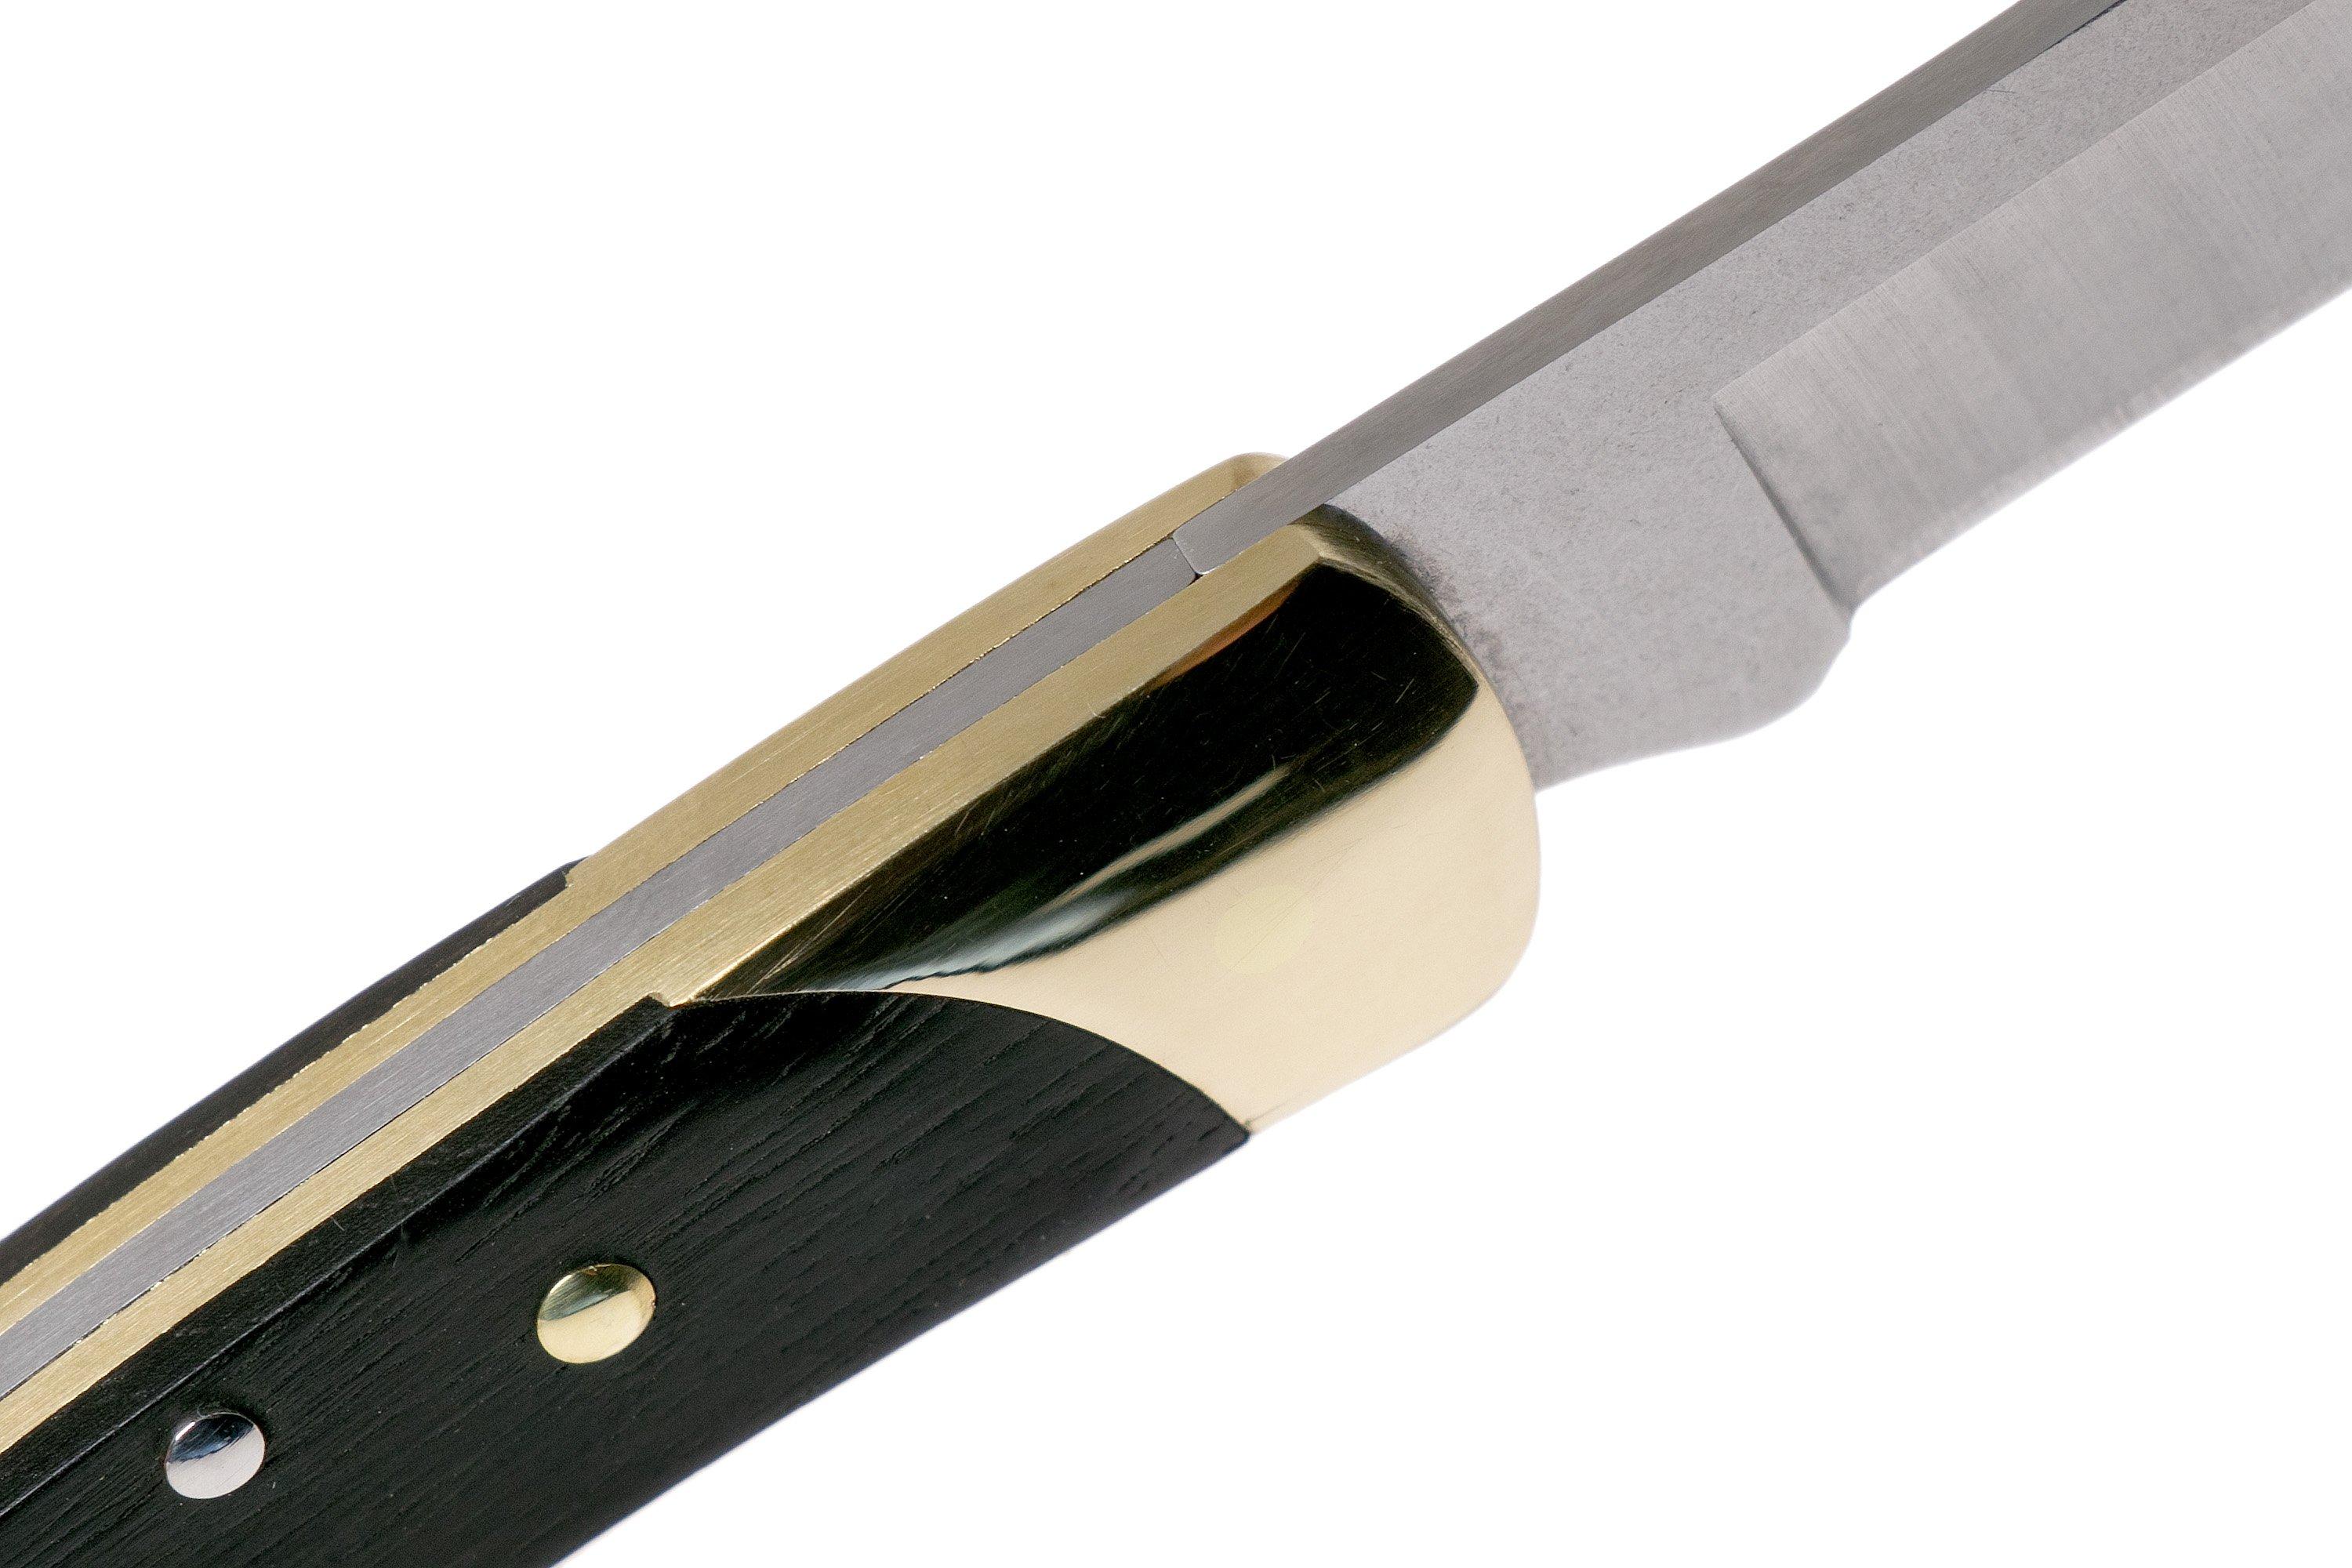 Buck The 55 Pocket Knife - Buck® Knives OFFICIAL SITE